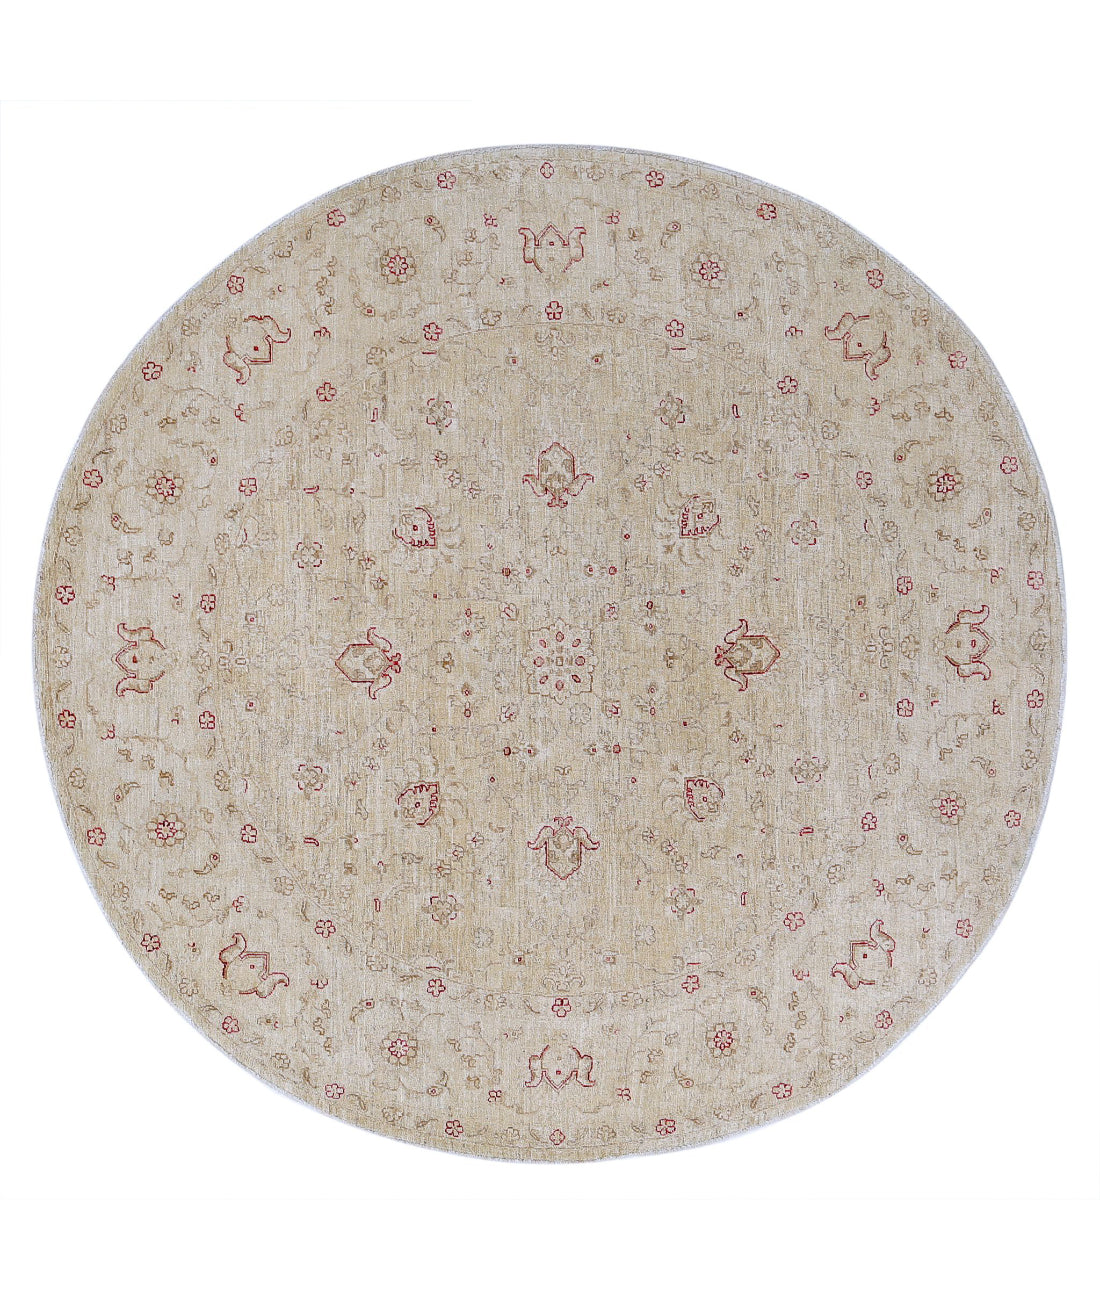 Hand Knotted Serenity Wool Rug - 7'10'' x 8'0'' 7'10'' x 8'0'' (235 X 240) / Ivory / Taupe